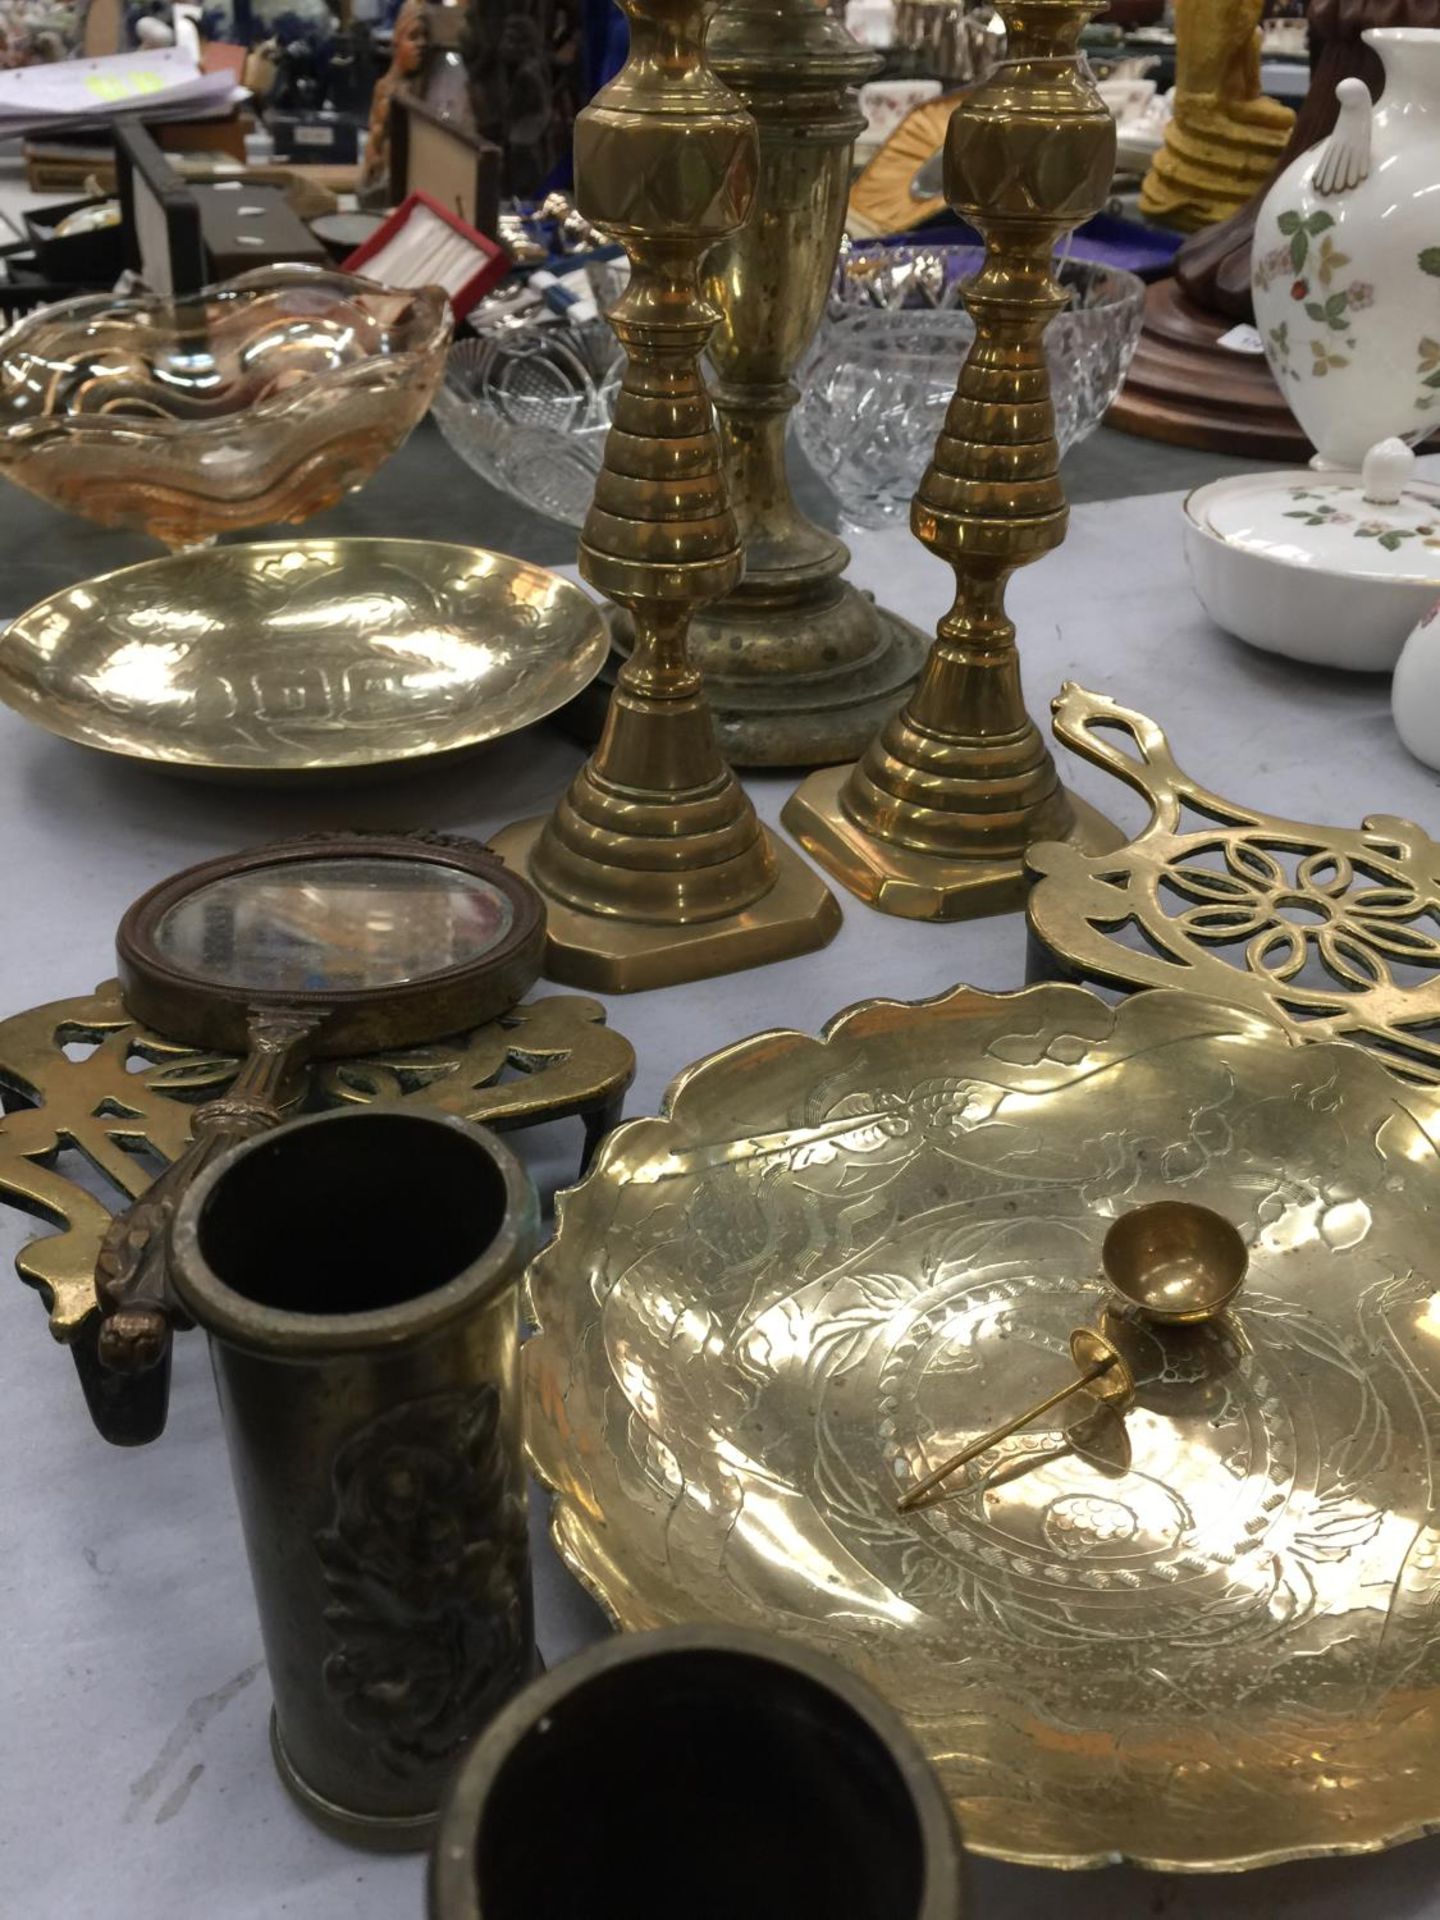 A QUANTITY OF BRASSWARE TO INCLUDE A PLANT HOLDER, CANDLESTICKS, TRIVETS, BOWLS, ETC - Image 9 of 9